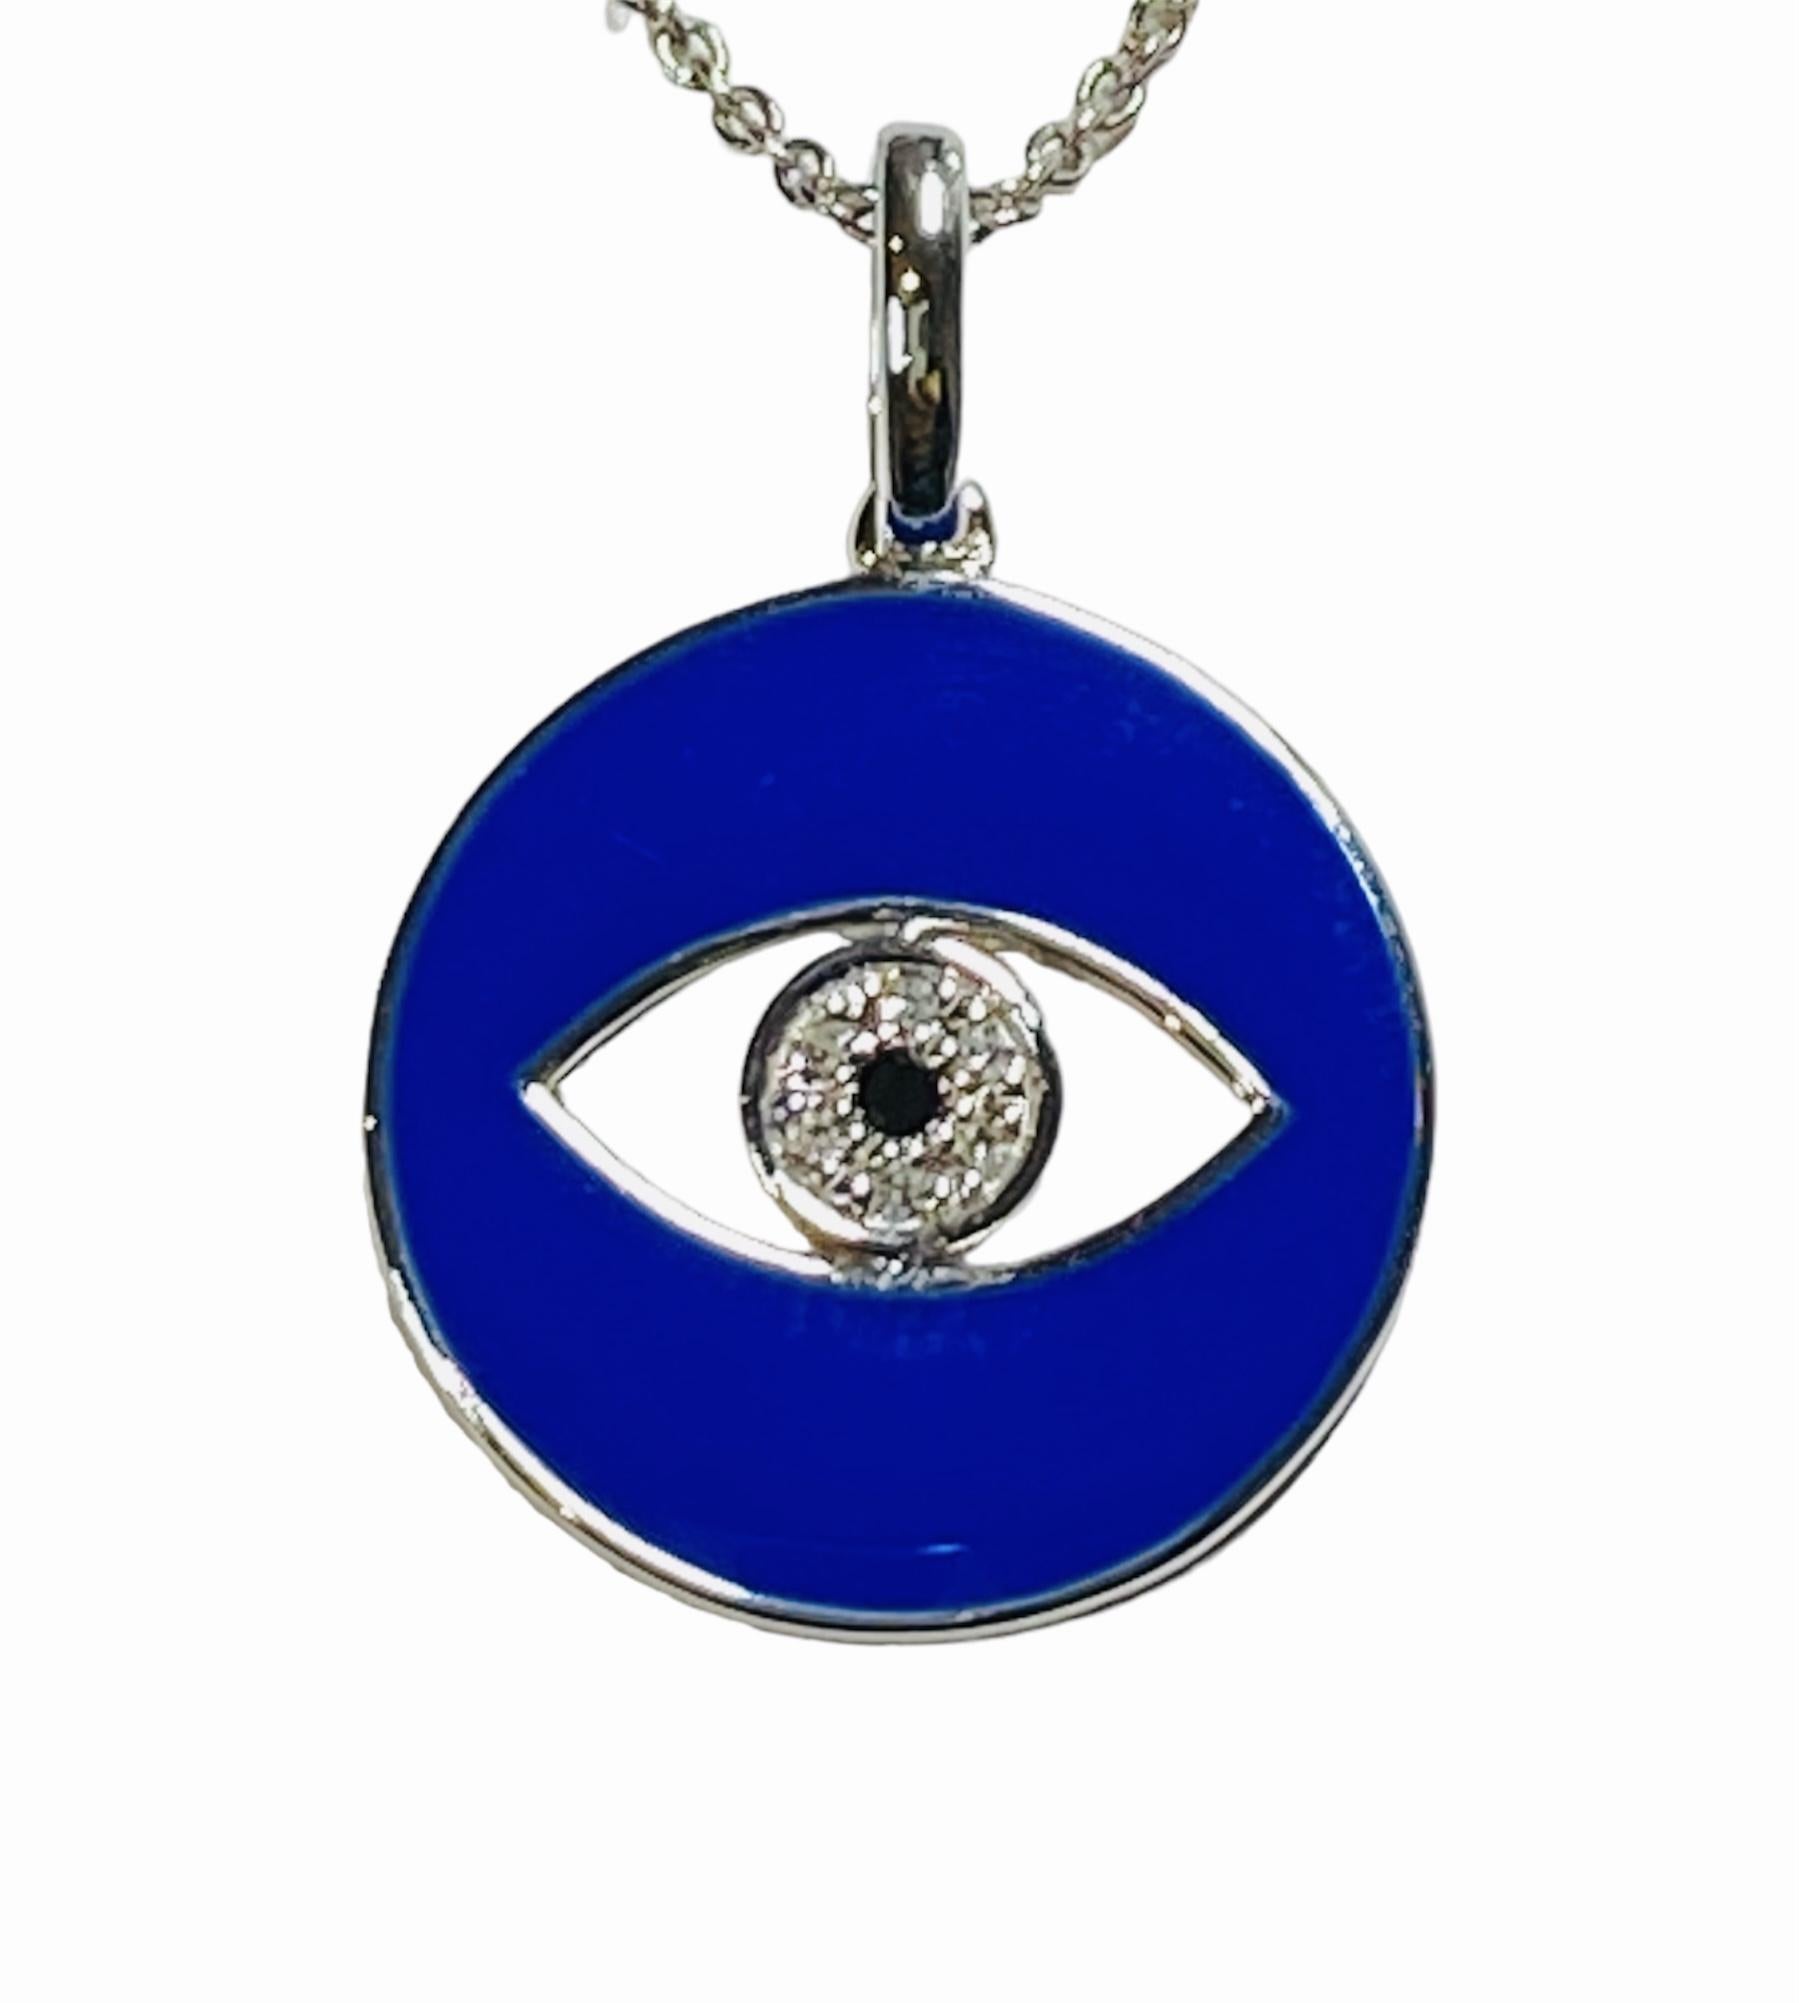 Solid 14K White Gold Evil Eye Diamond Necklace 
Fall in love with this Royal Blue Enamel Evil Eye high-polish pendant with natural diamonds.
The Evil Eye is an symbol of spiritual protection and good health. 

14K White Gold 


Royal Blue
0.05 total